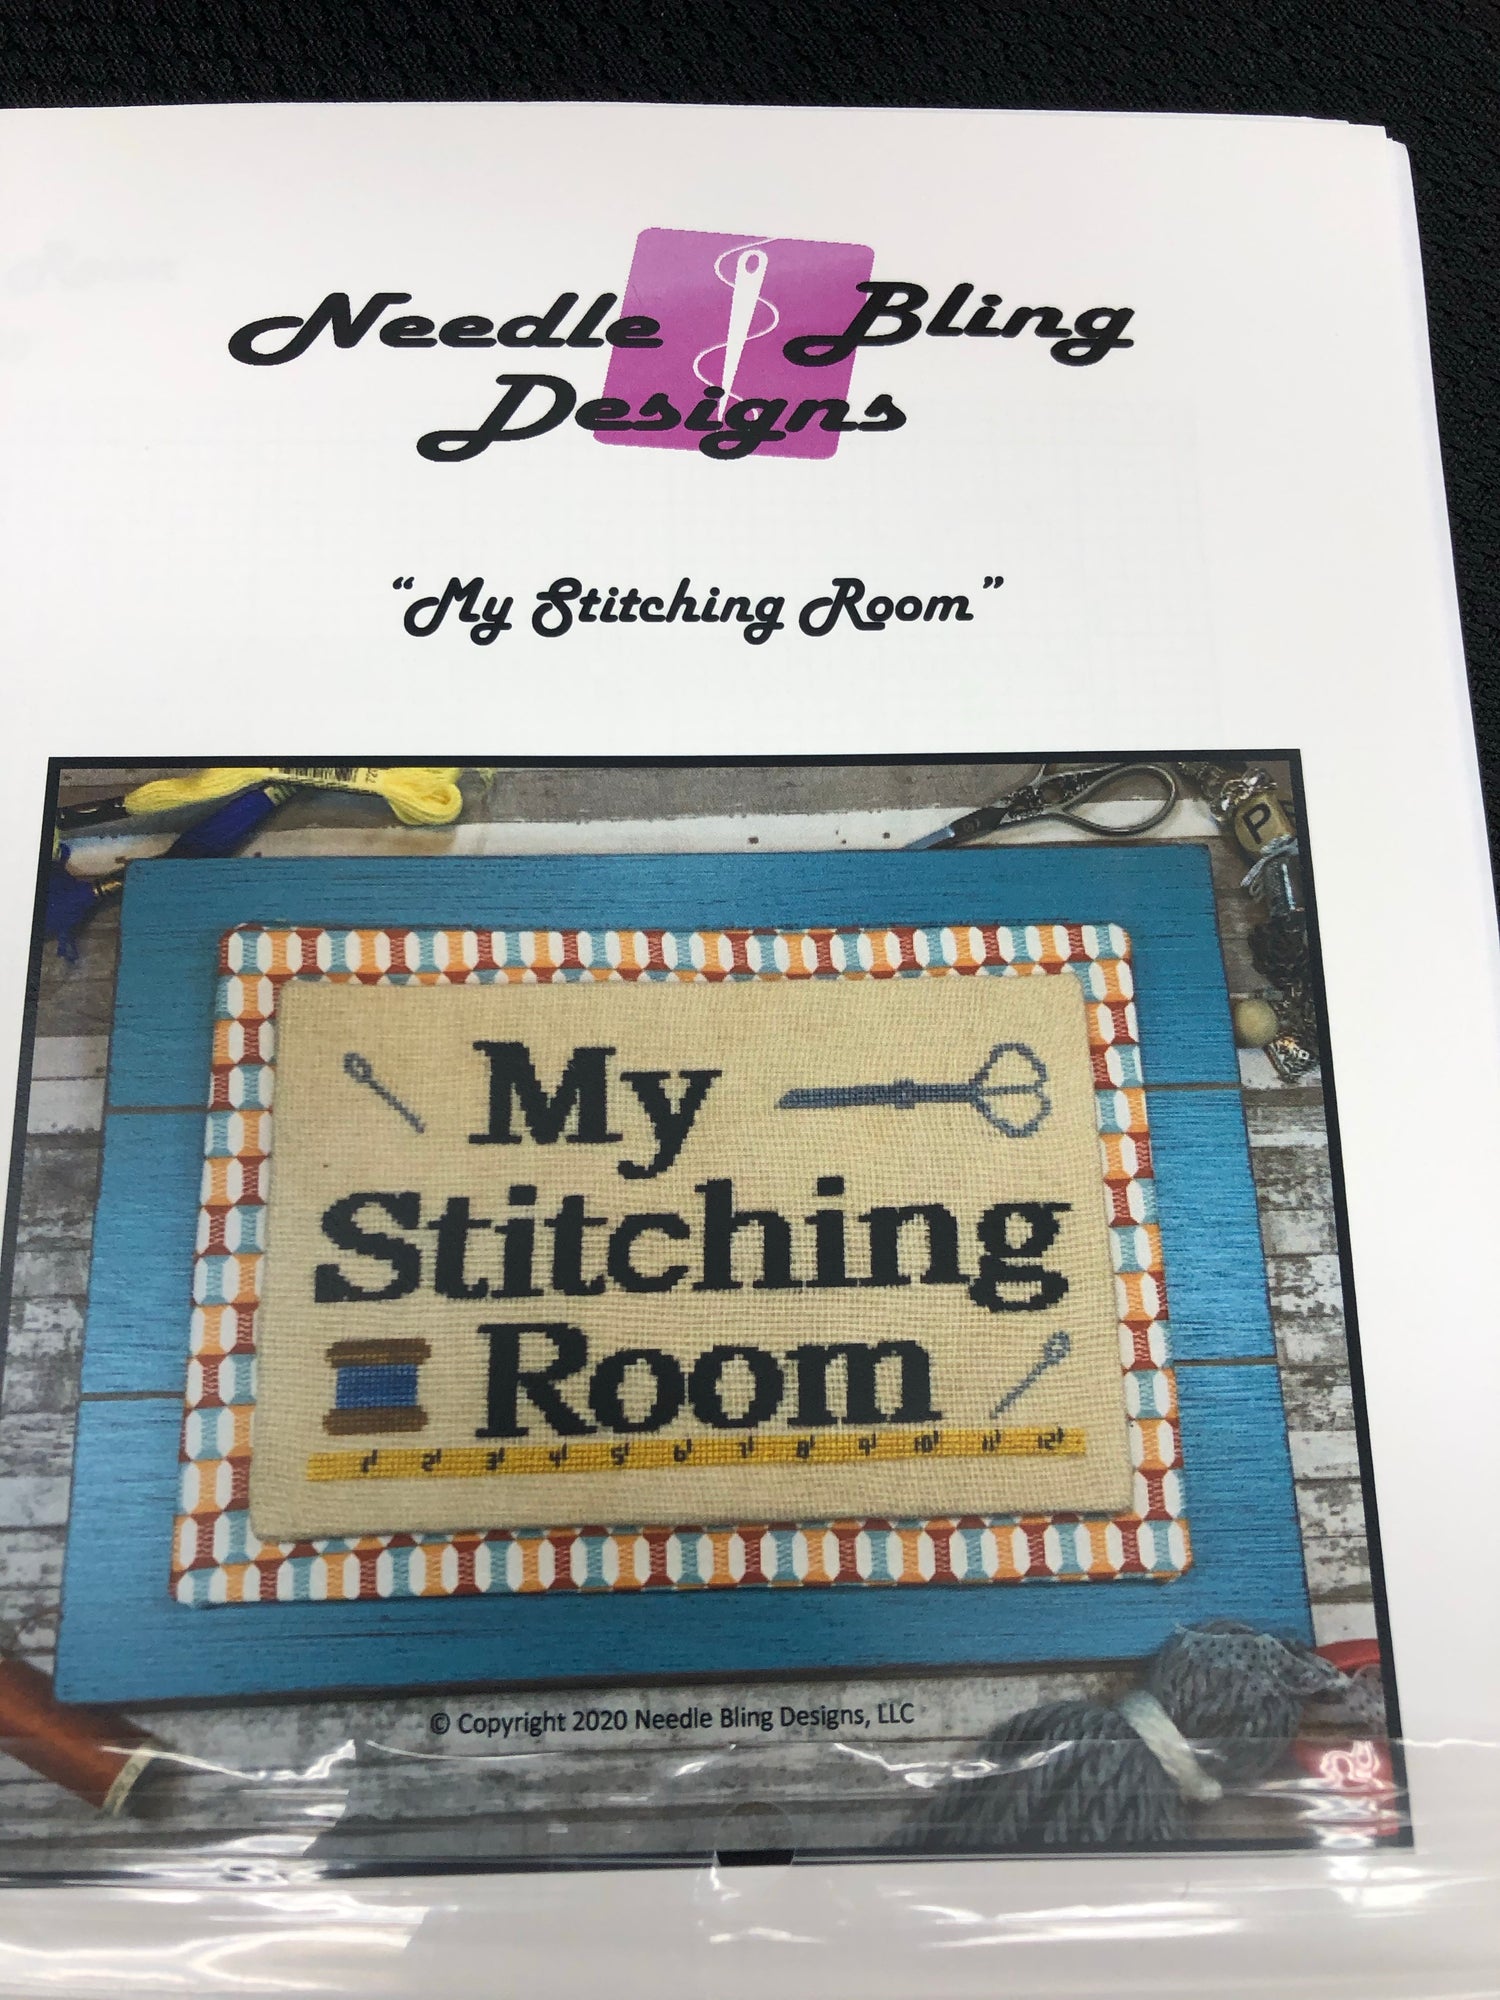 Stitching Room by Needle Bling